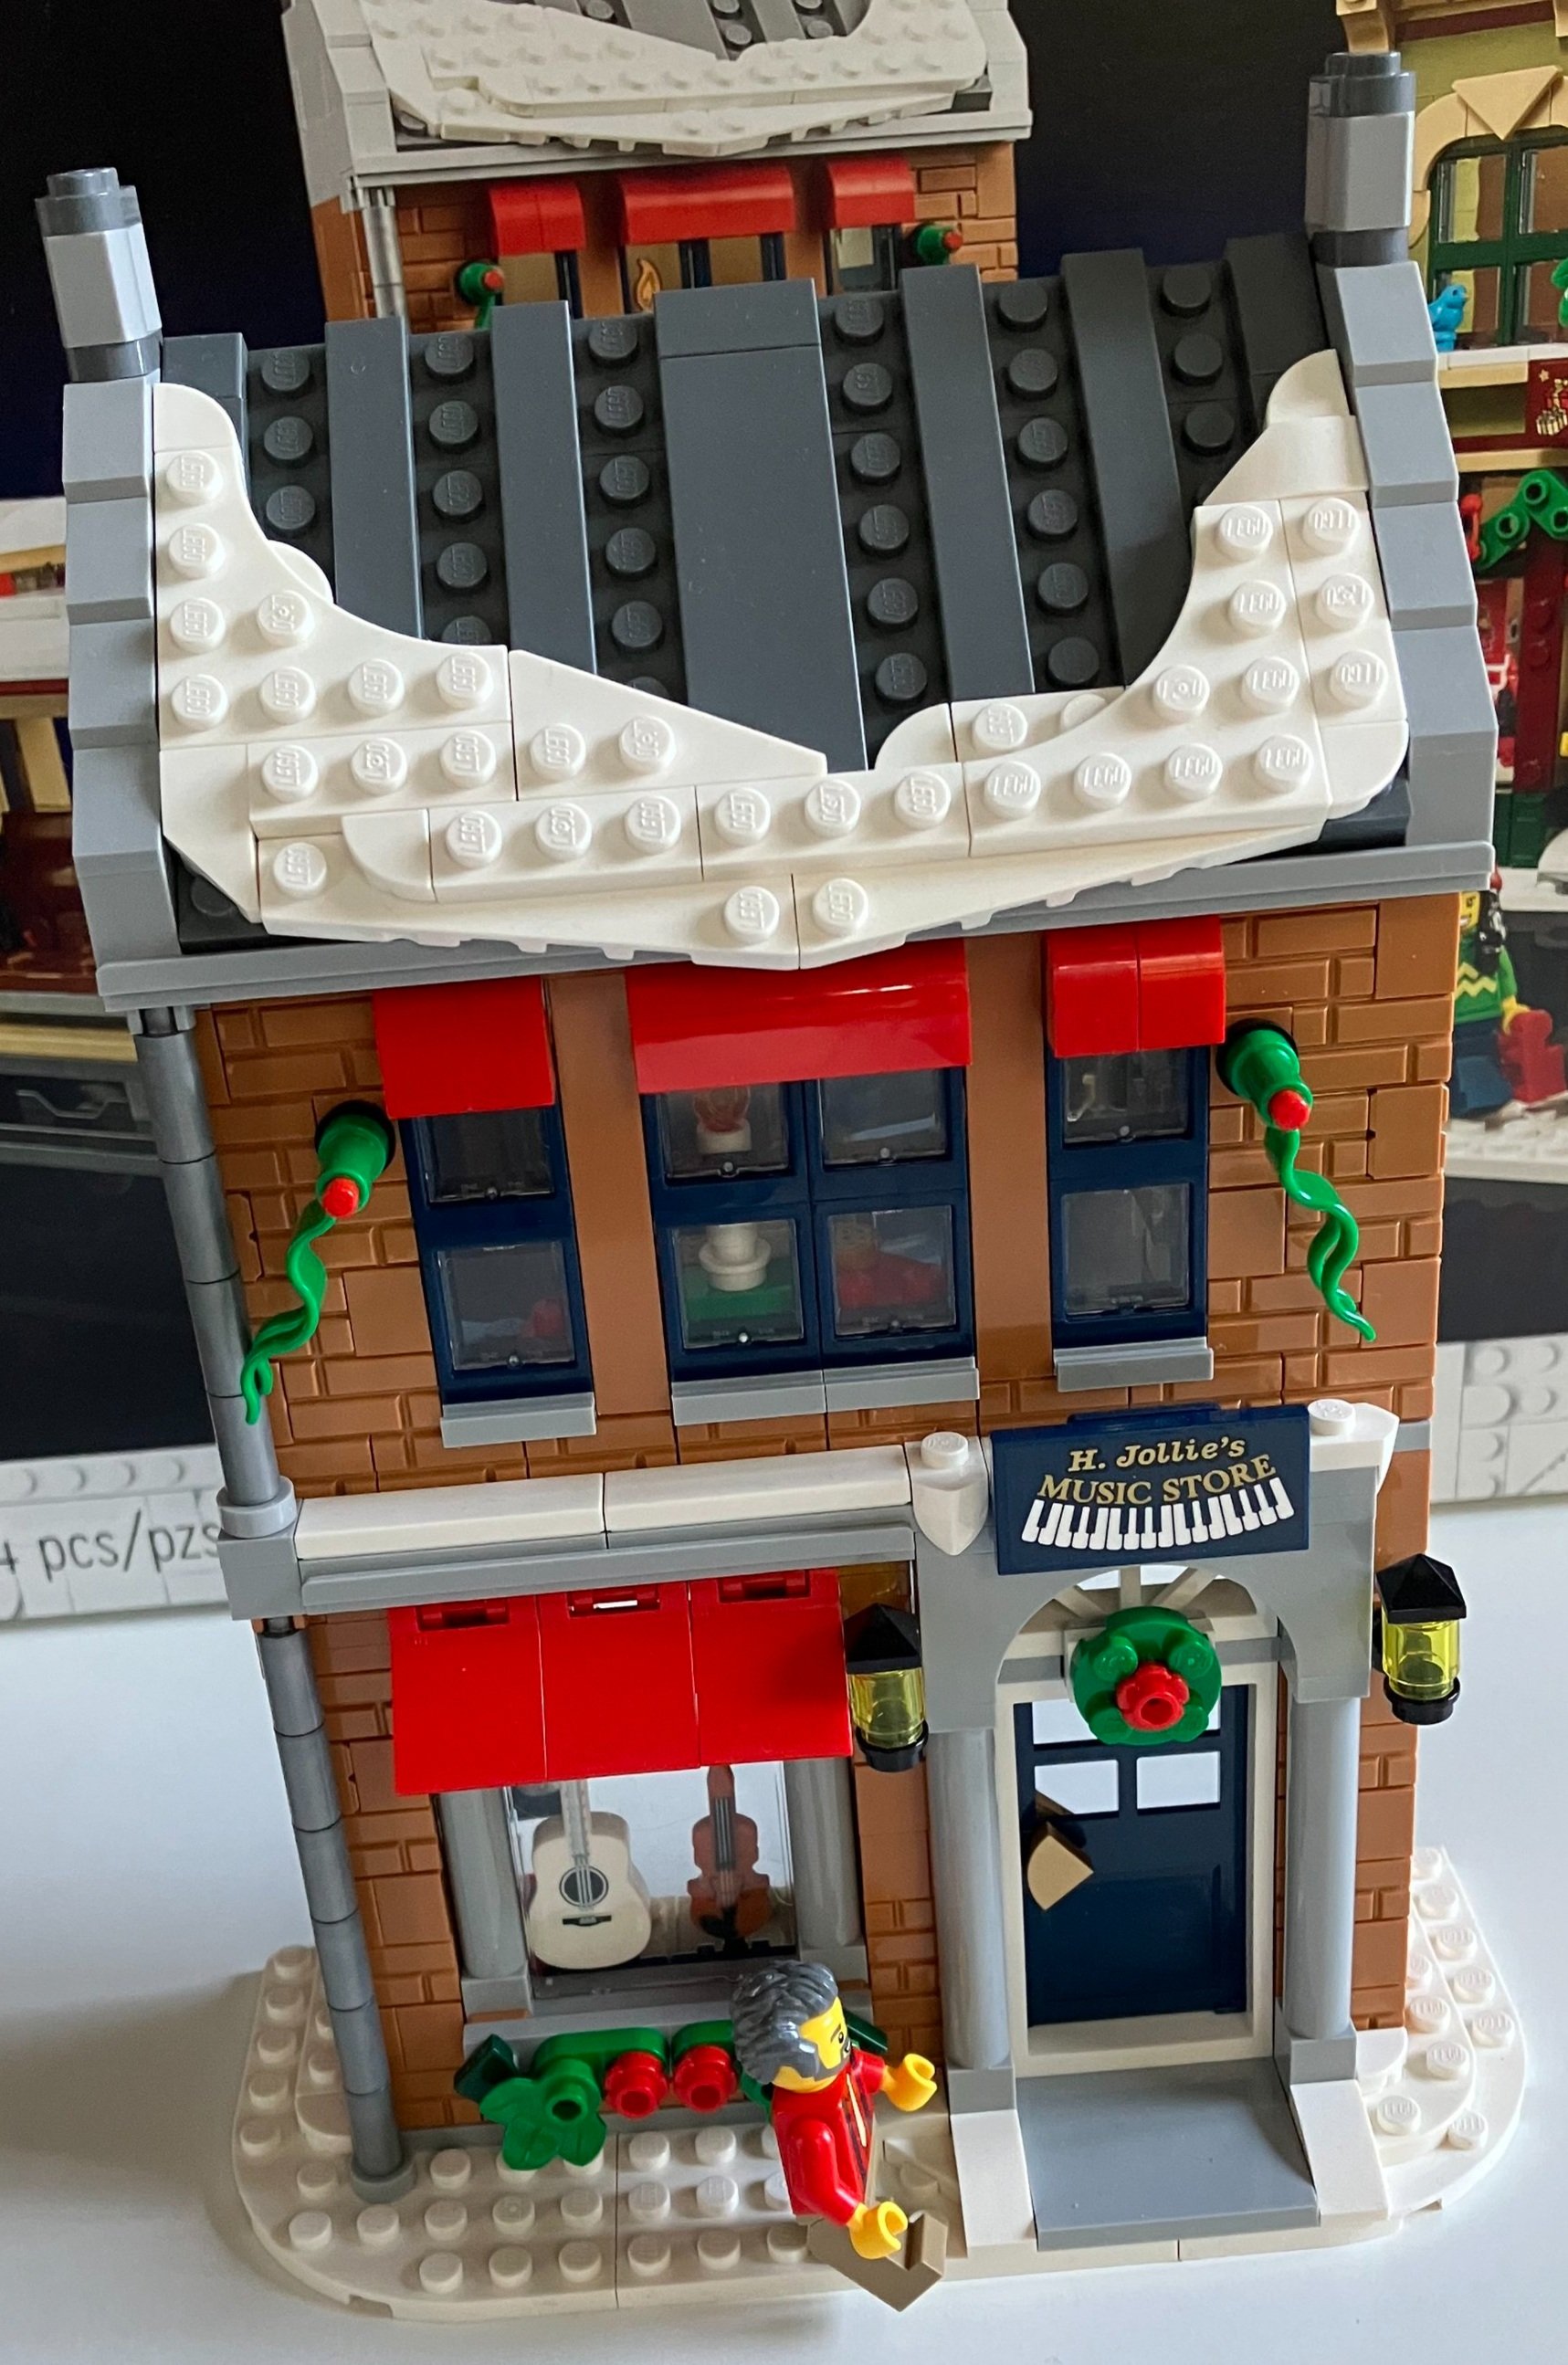 IVE FINALLY GOTTEN IT! LEGO 10211 GRAND EMPORIUM! I've wanted this for  years, and just today have gotten it. I've put it next to my petshop for a  photo. : r/lego